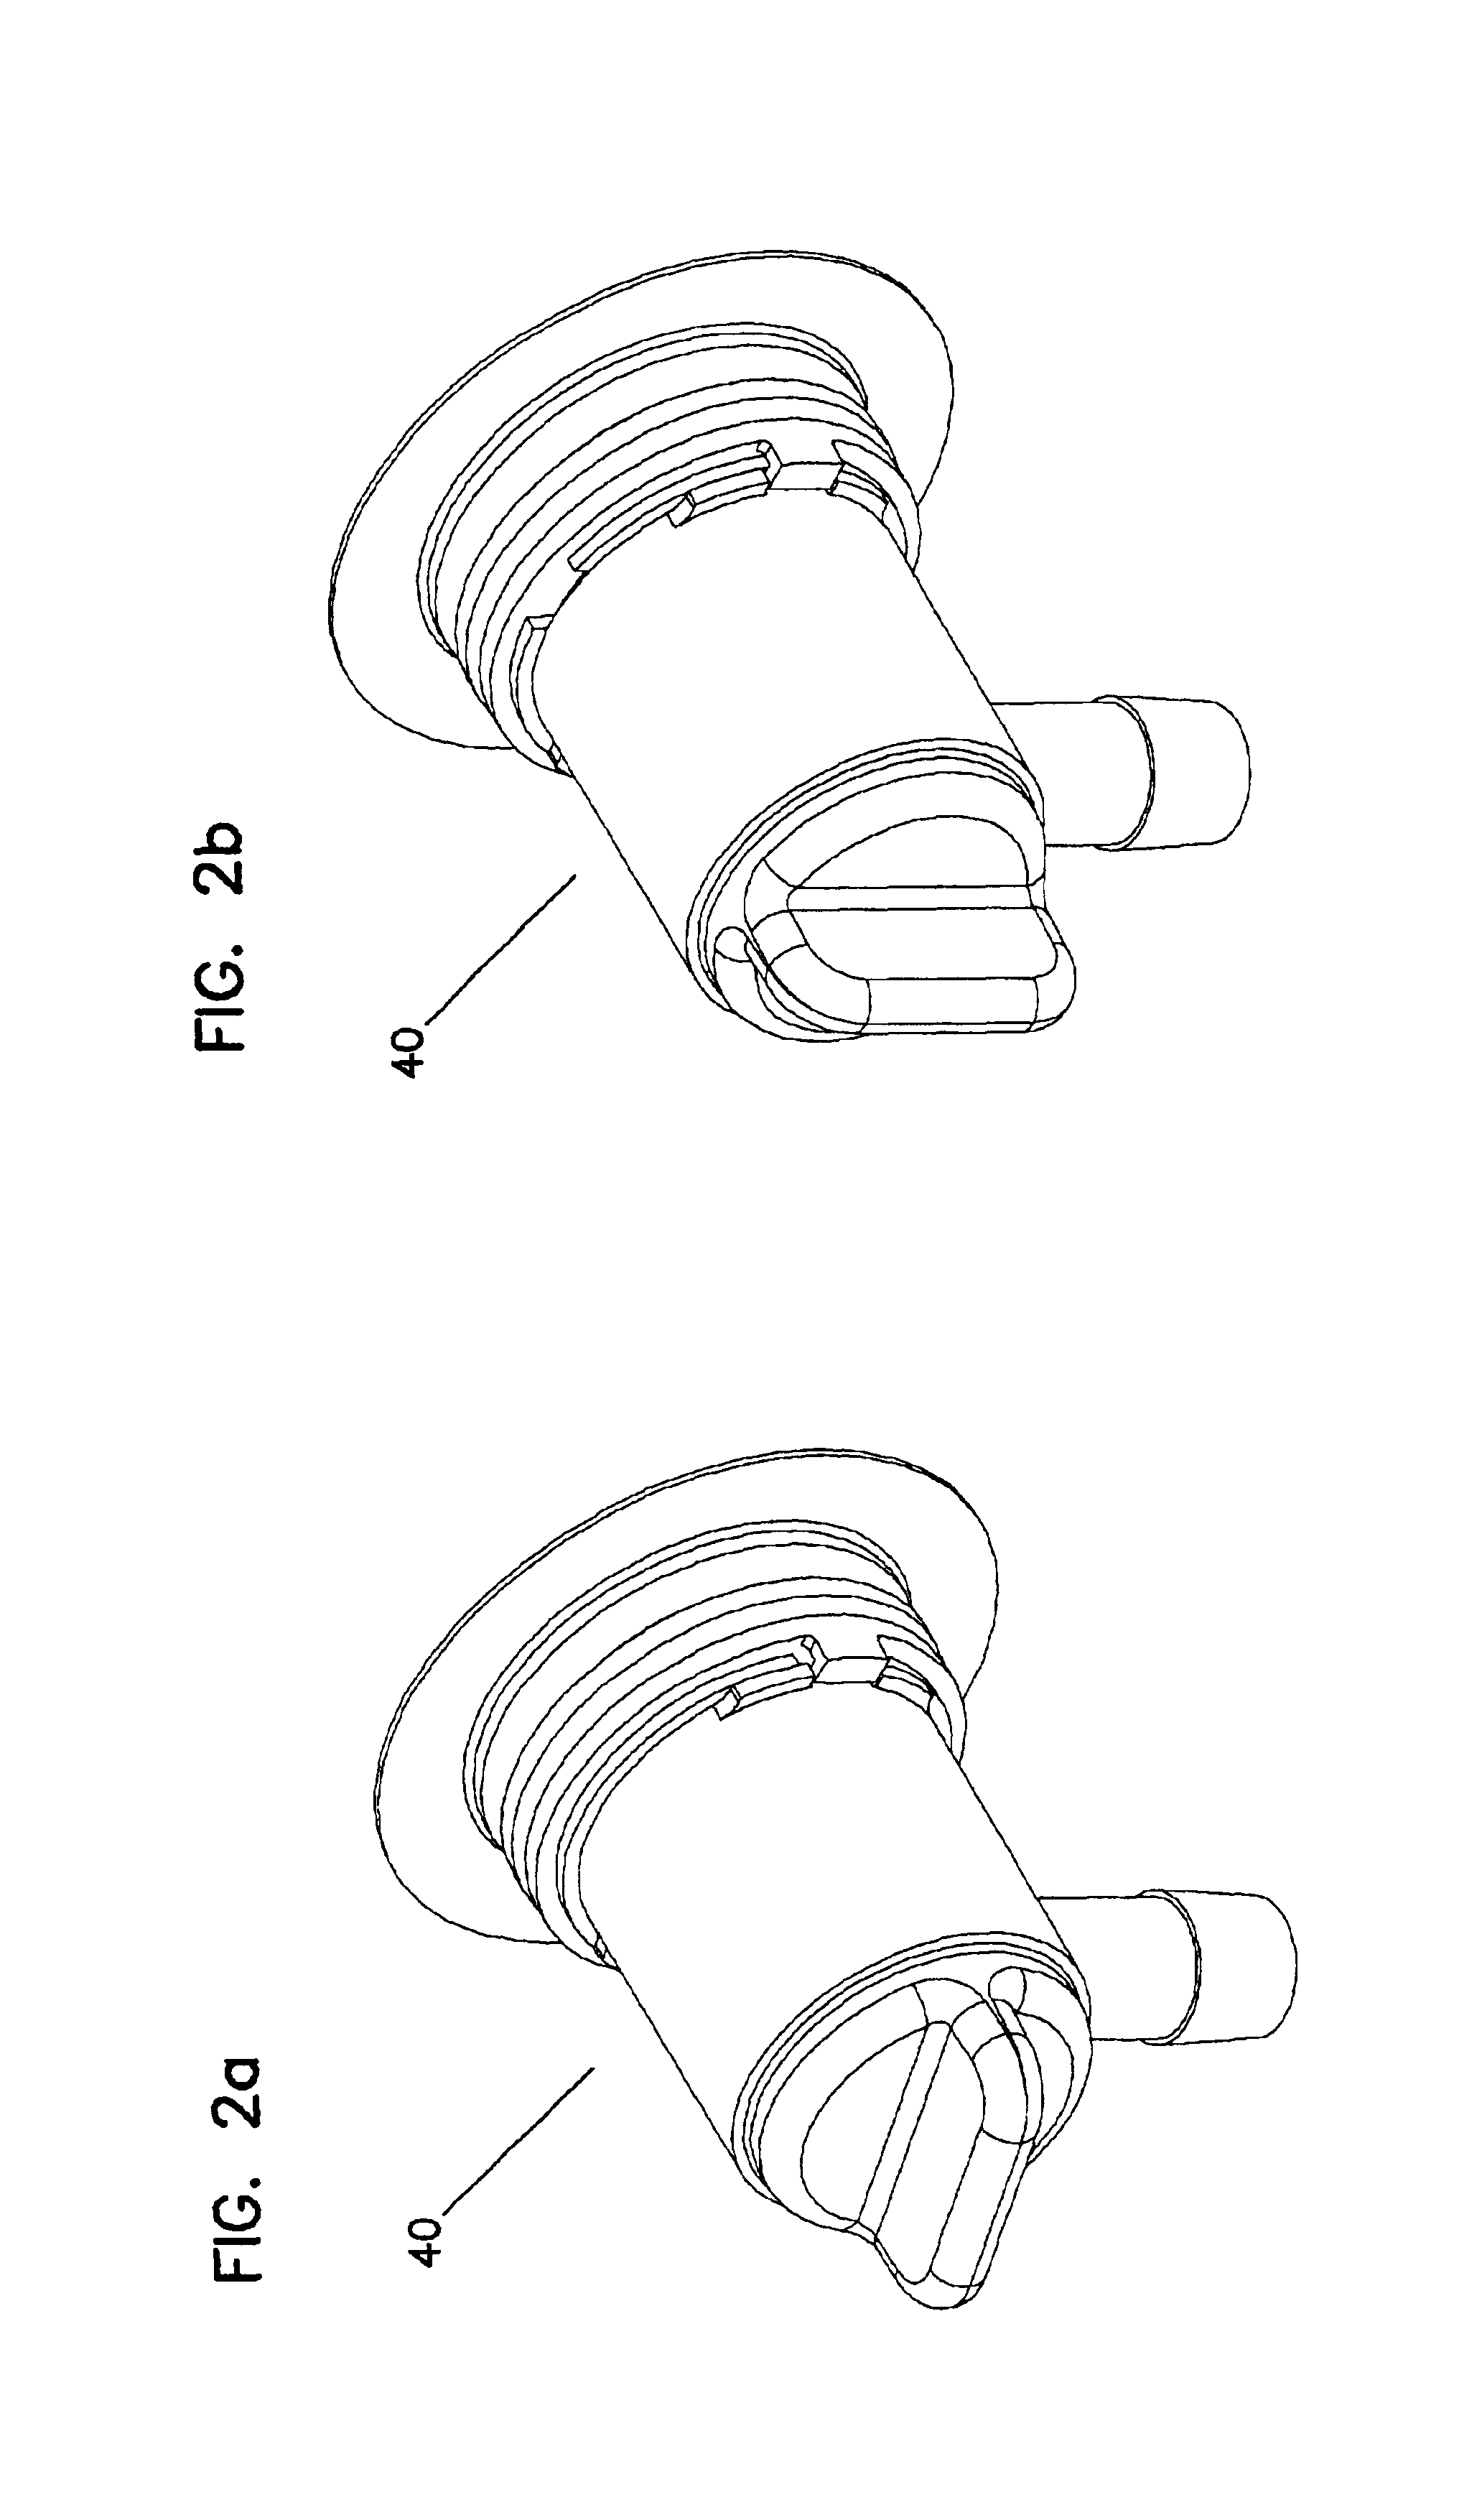 Coupling and closure apparatus for dispensing valve assembly